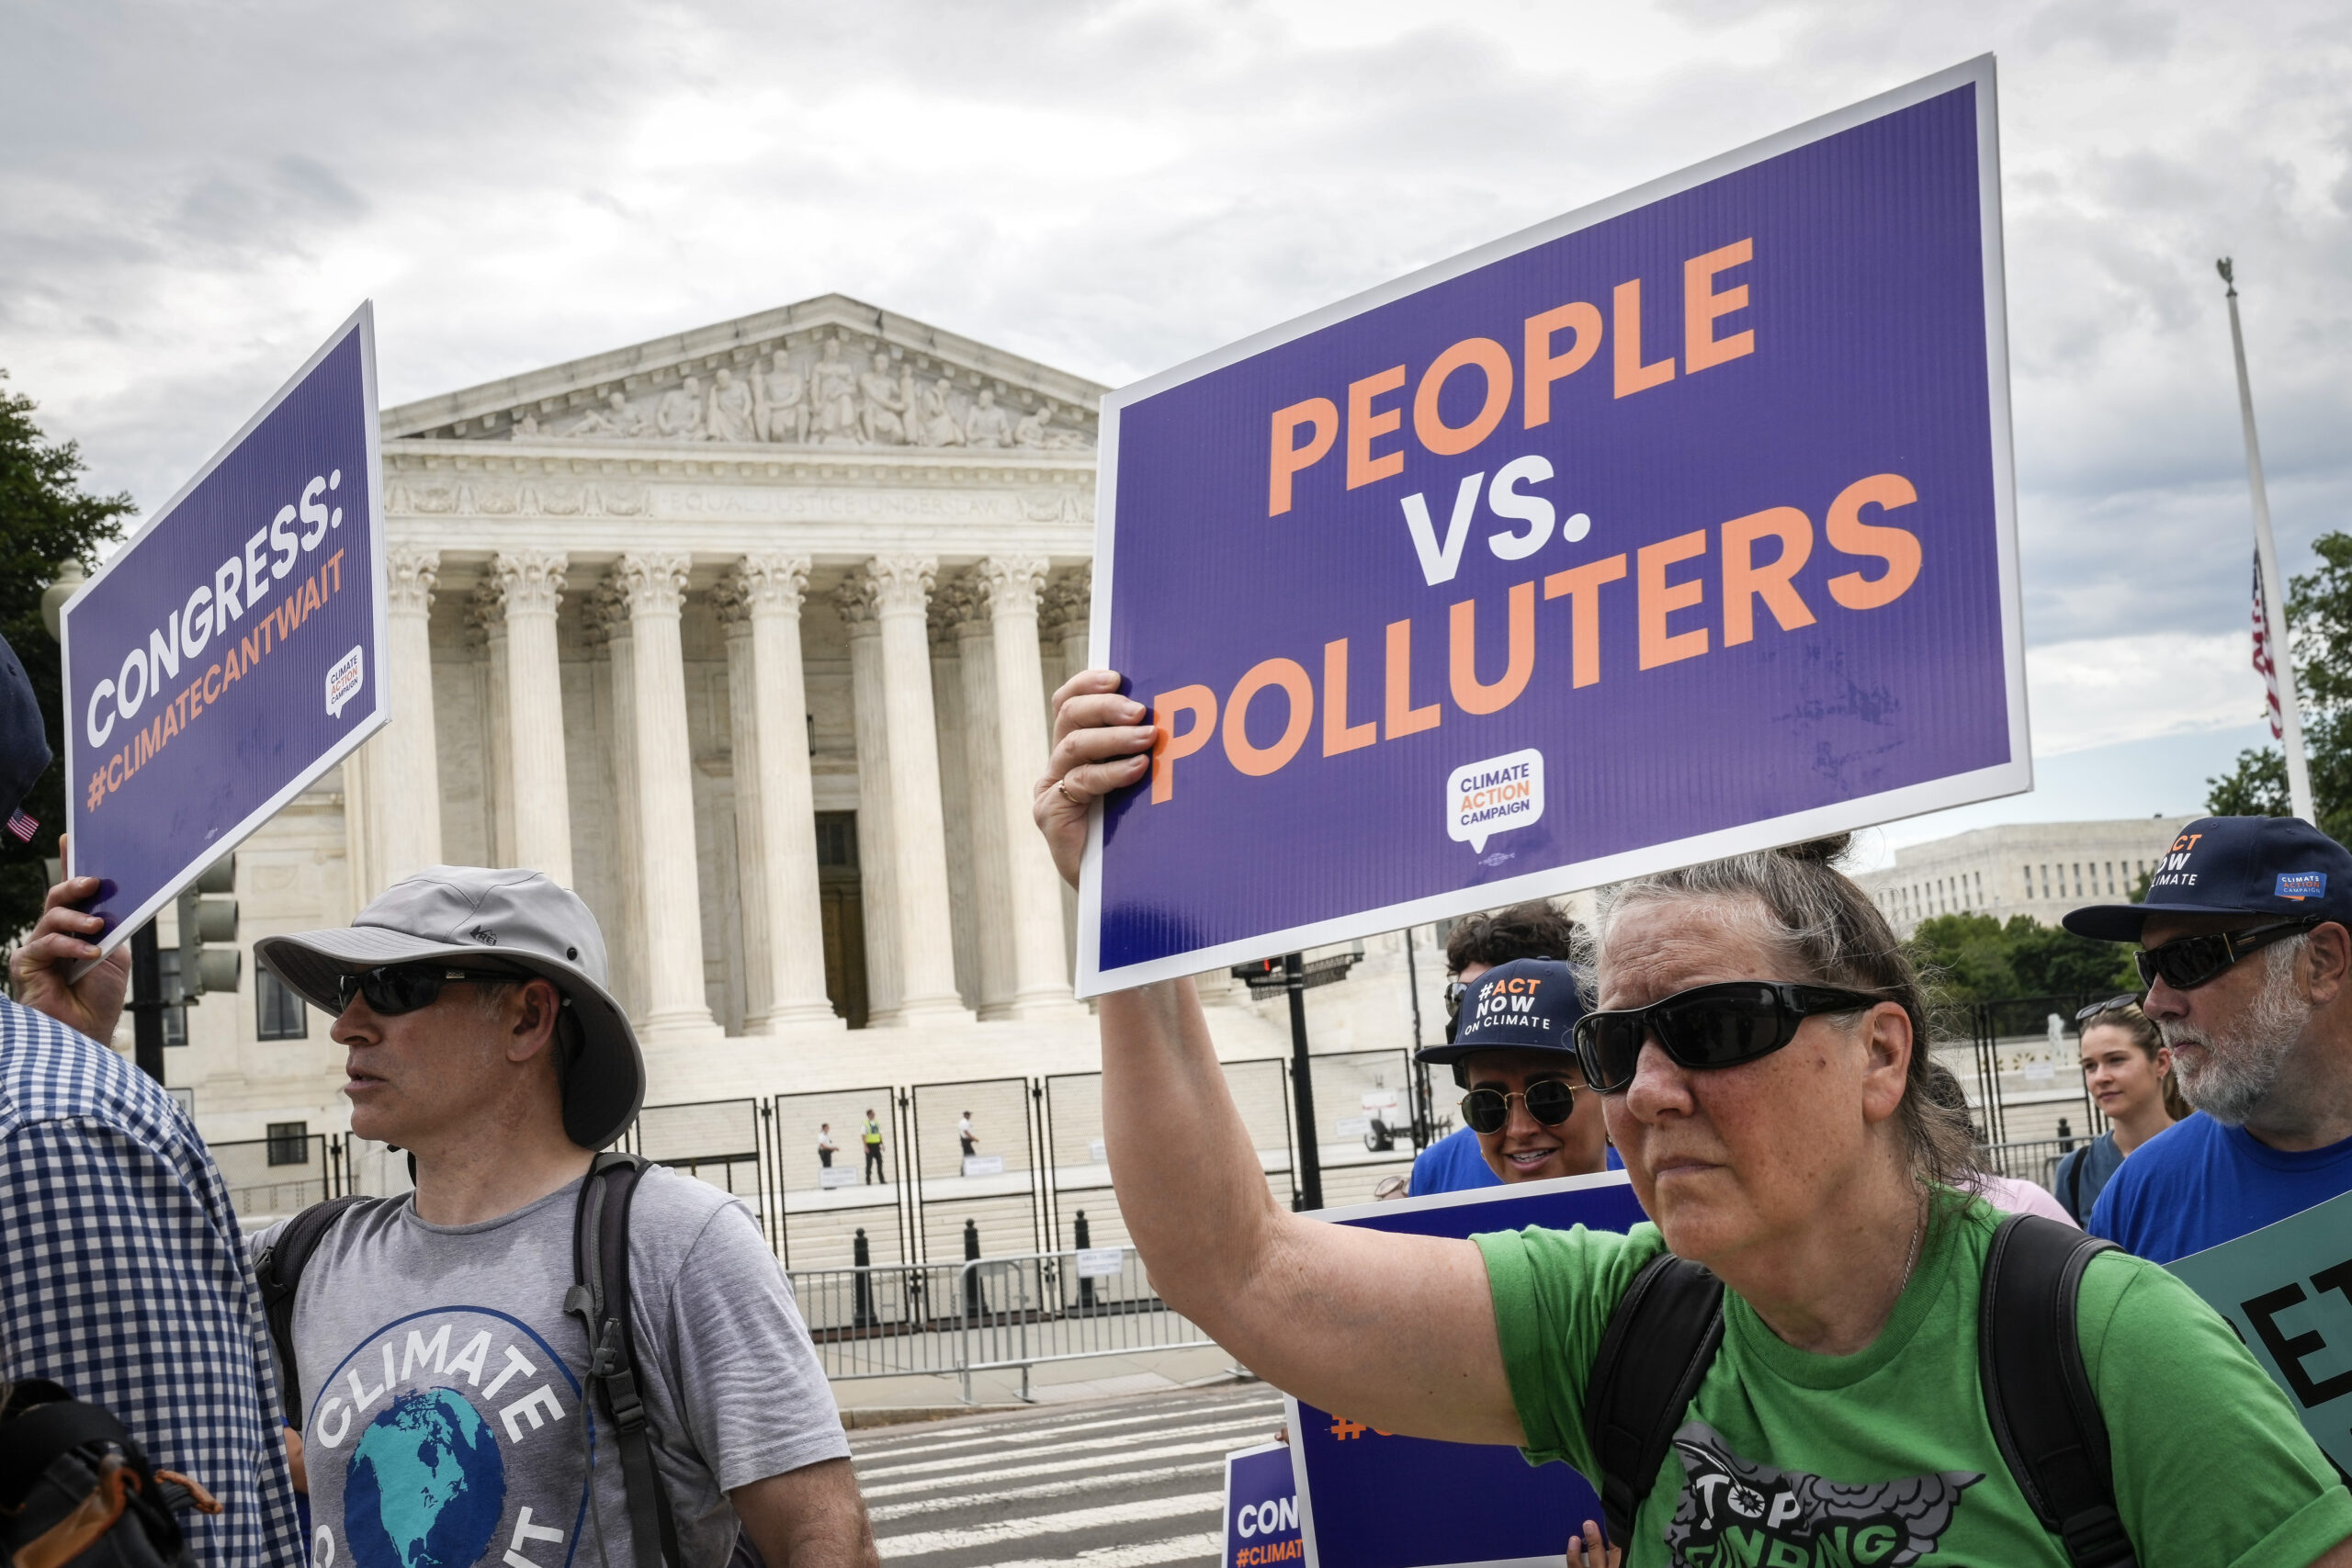 Climate Activists Rally Outside The Supreme Court Over Their Recent EPA Decision